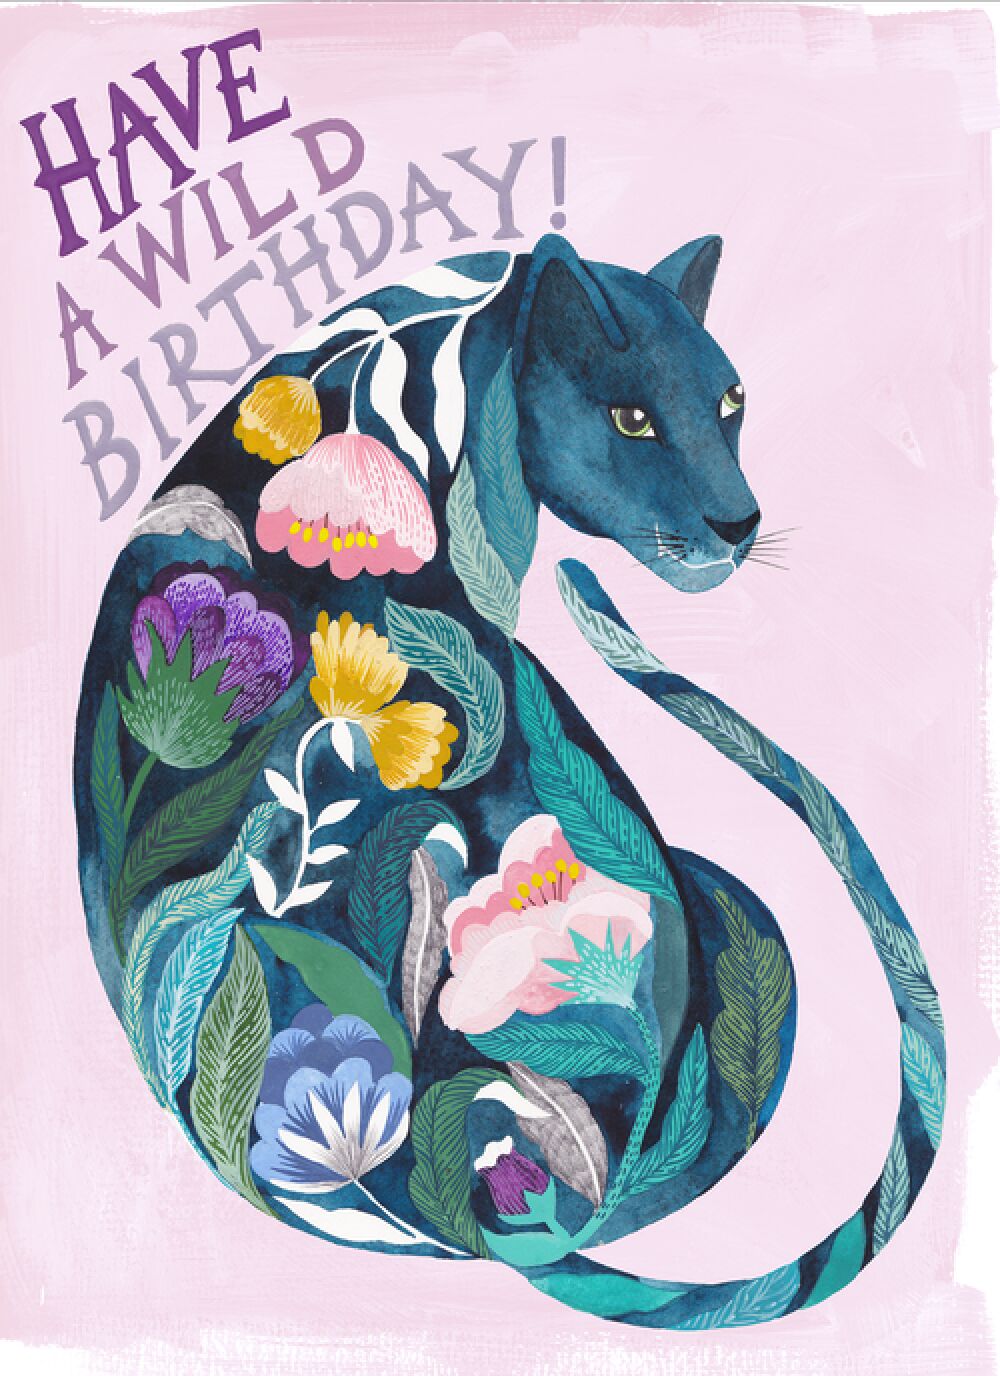 Illustrated panther by Malin Gyllensvaan